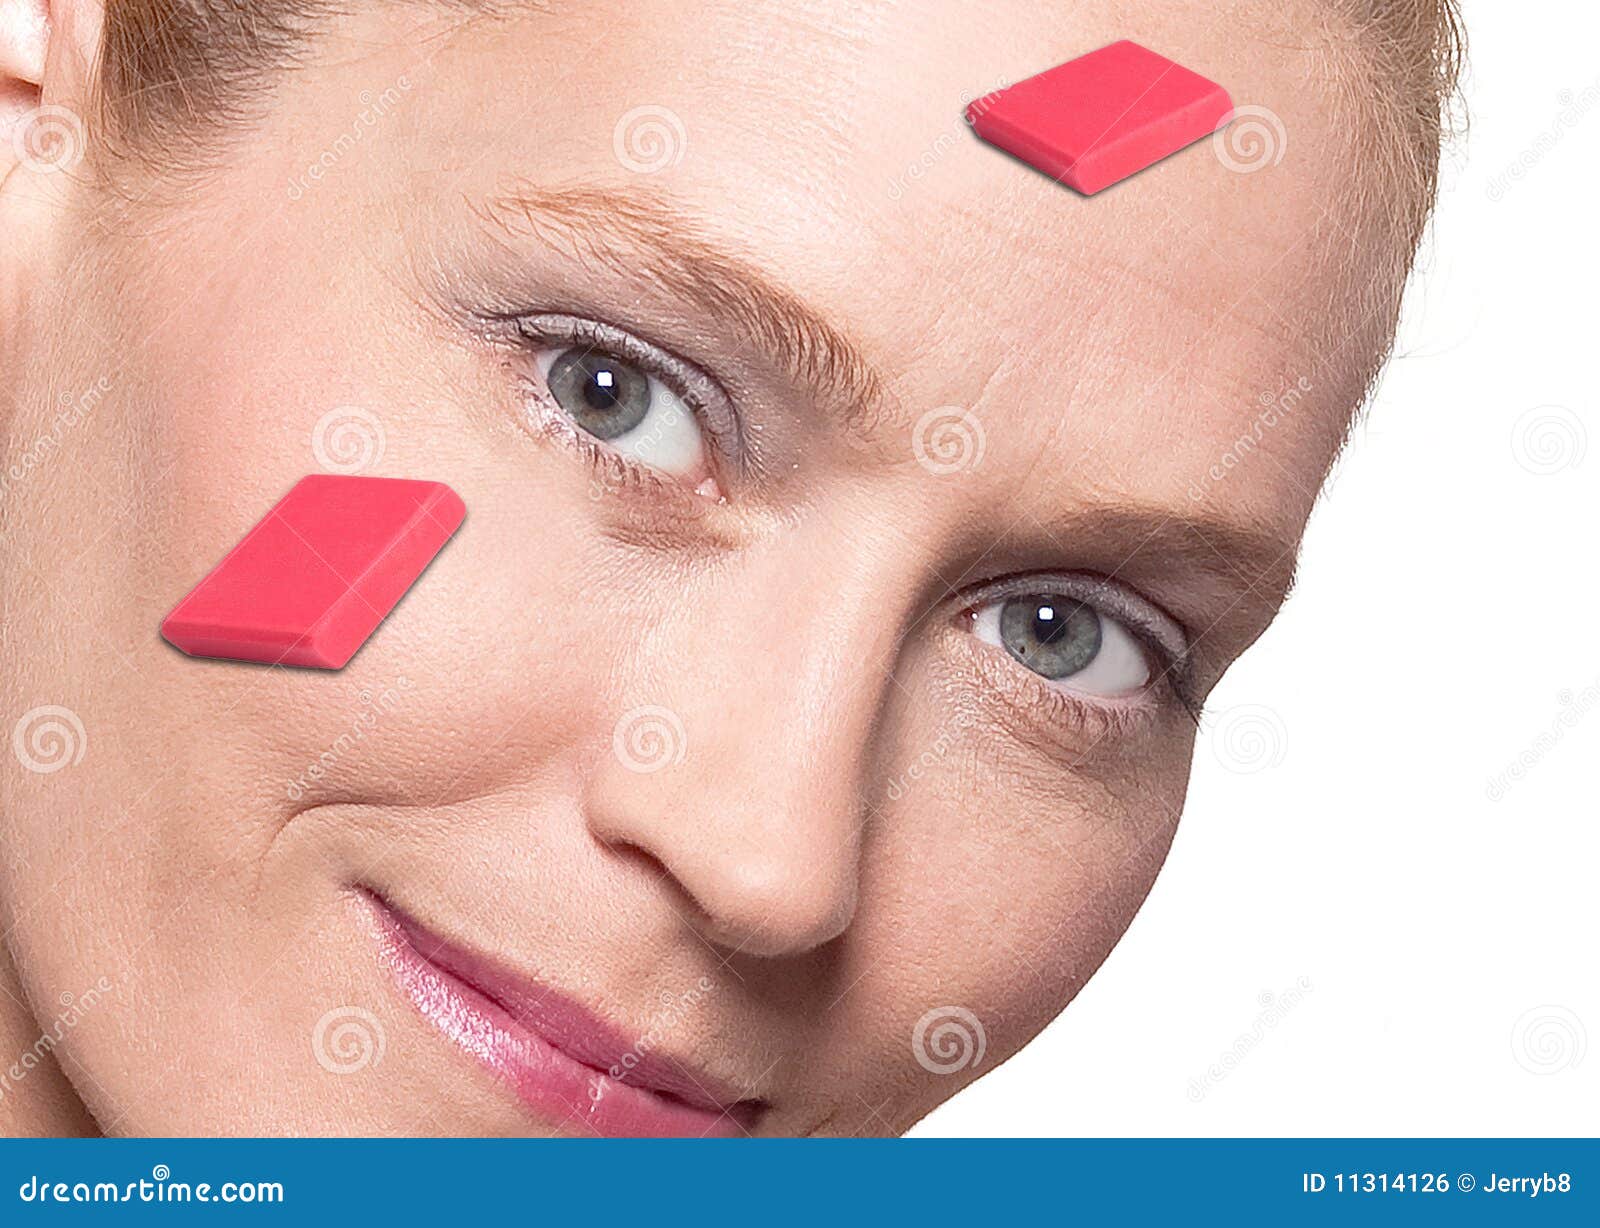 woman's face with erasers